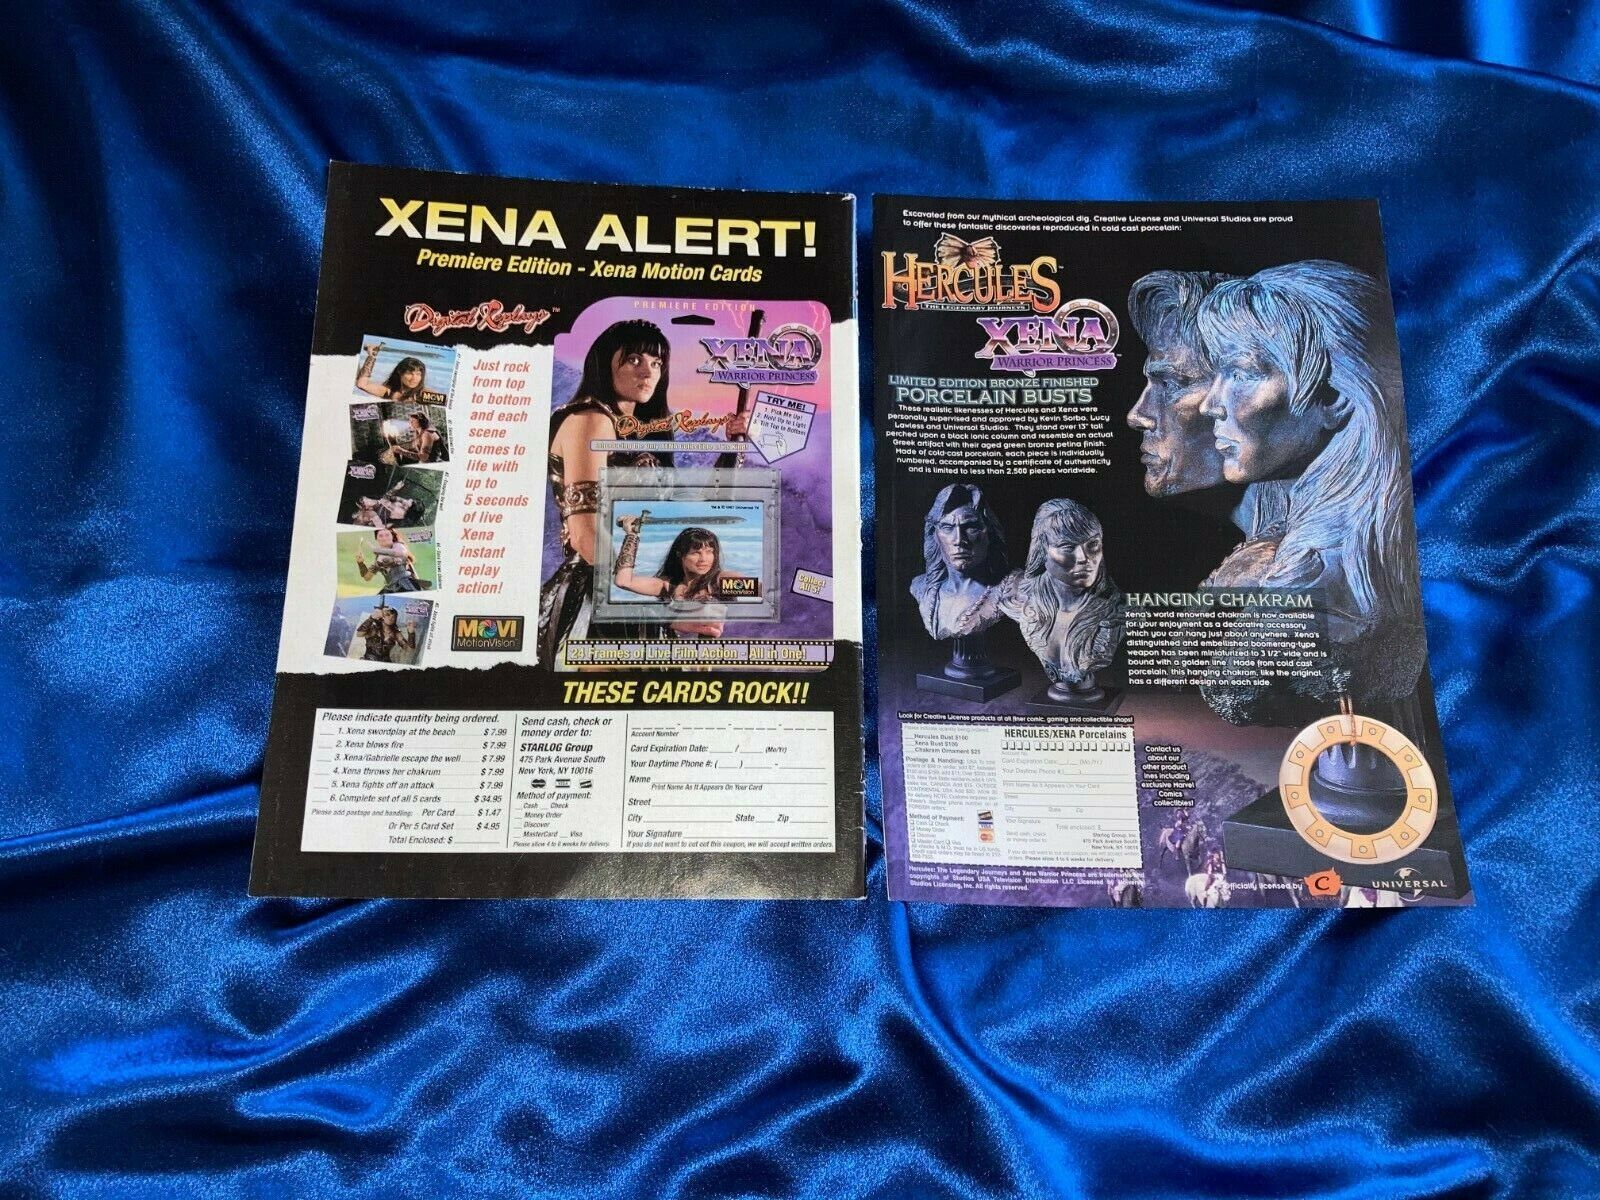 LOT of two ADs for the Xena & Hercules Busts, Chakram Ornament, & Digital Cards